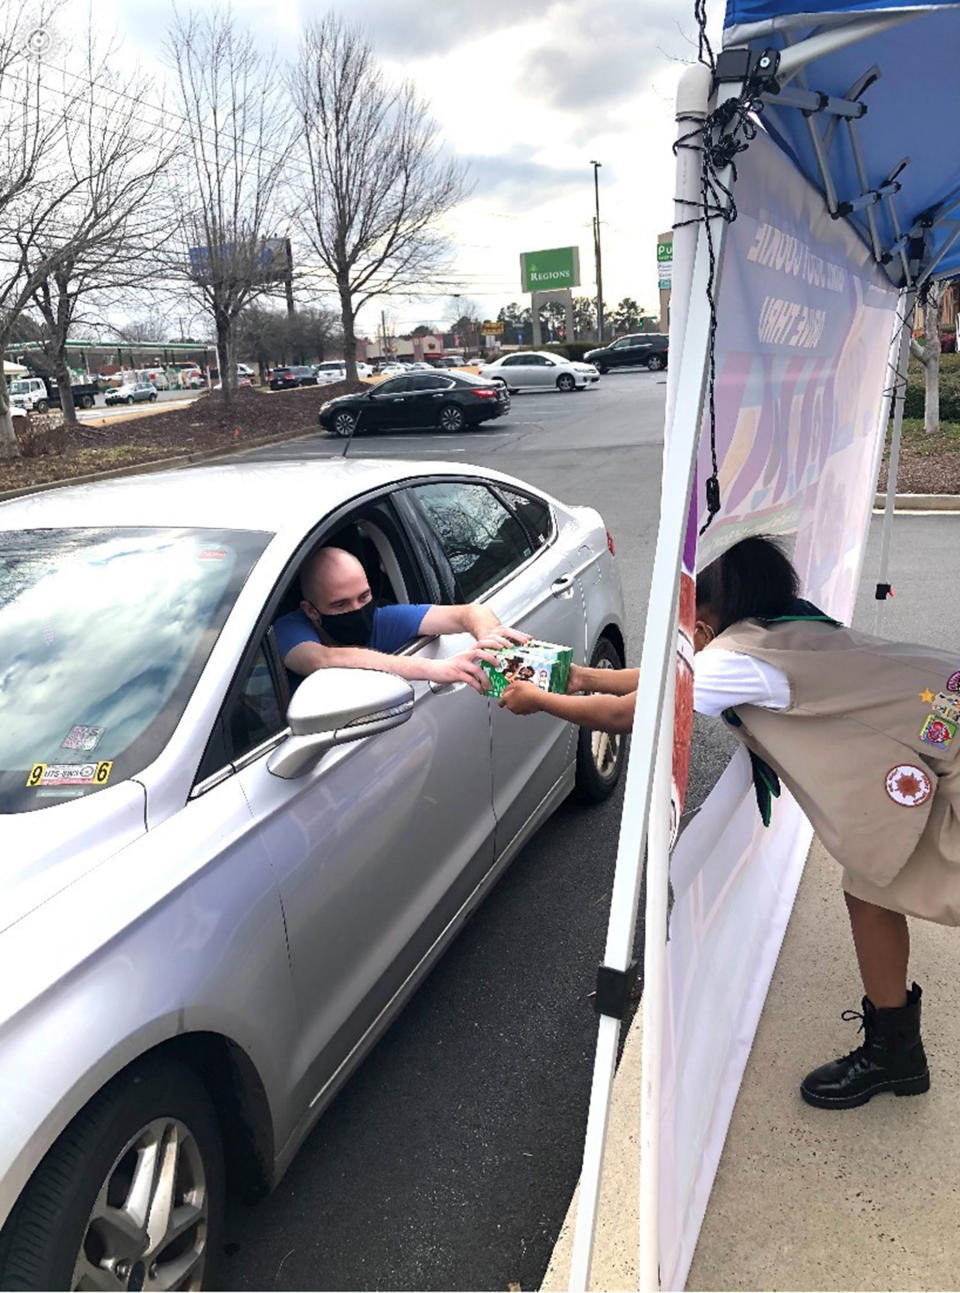 The drive-thru shops were a safe, socially distant way to drum up sales during a unique season where in-person selling was difficult.  (Michele Samuel / Troop 14665 Girl Scouts of Greater Atlanta)